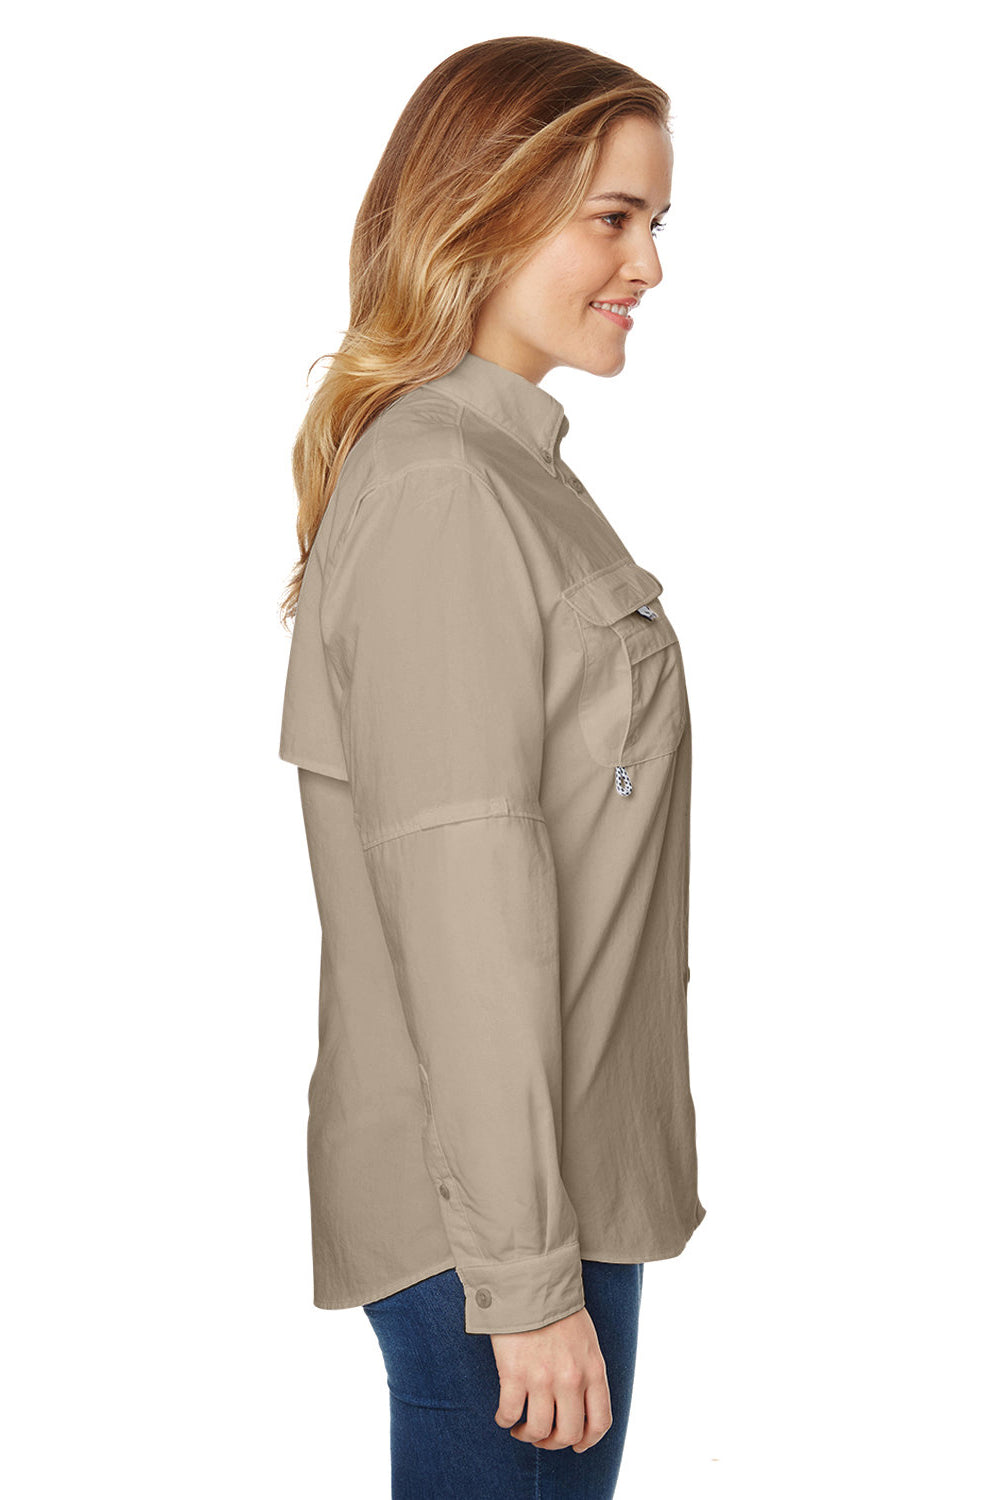 Columbia 7314/139656 Womens Bahama Moisture Wicking Long Sleeve Button Down Shirt w/ Double Pockets Fossil SIde